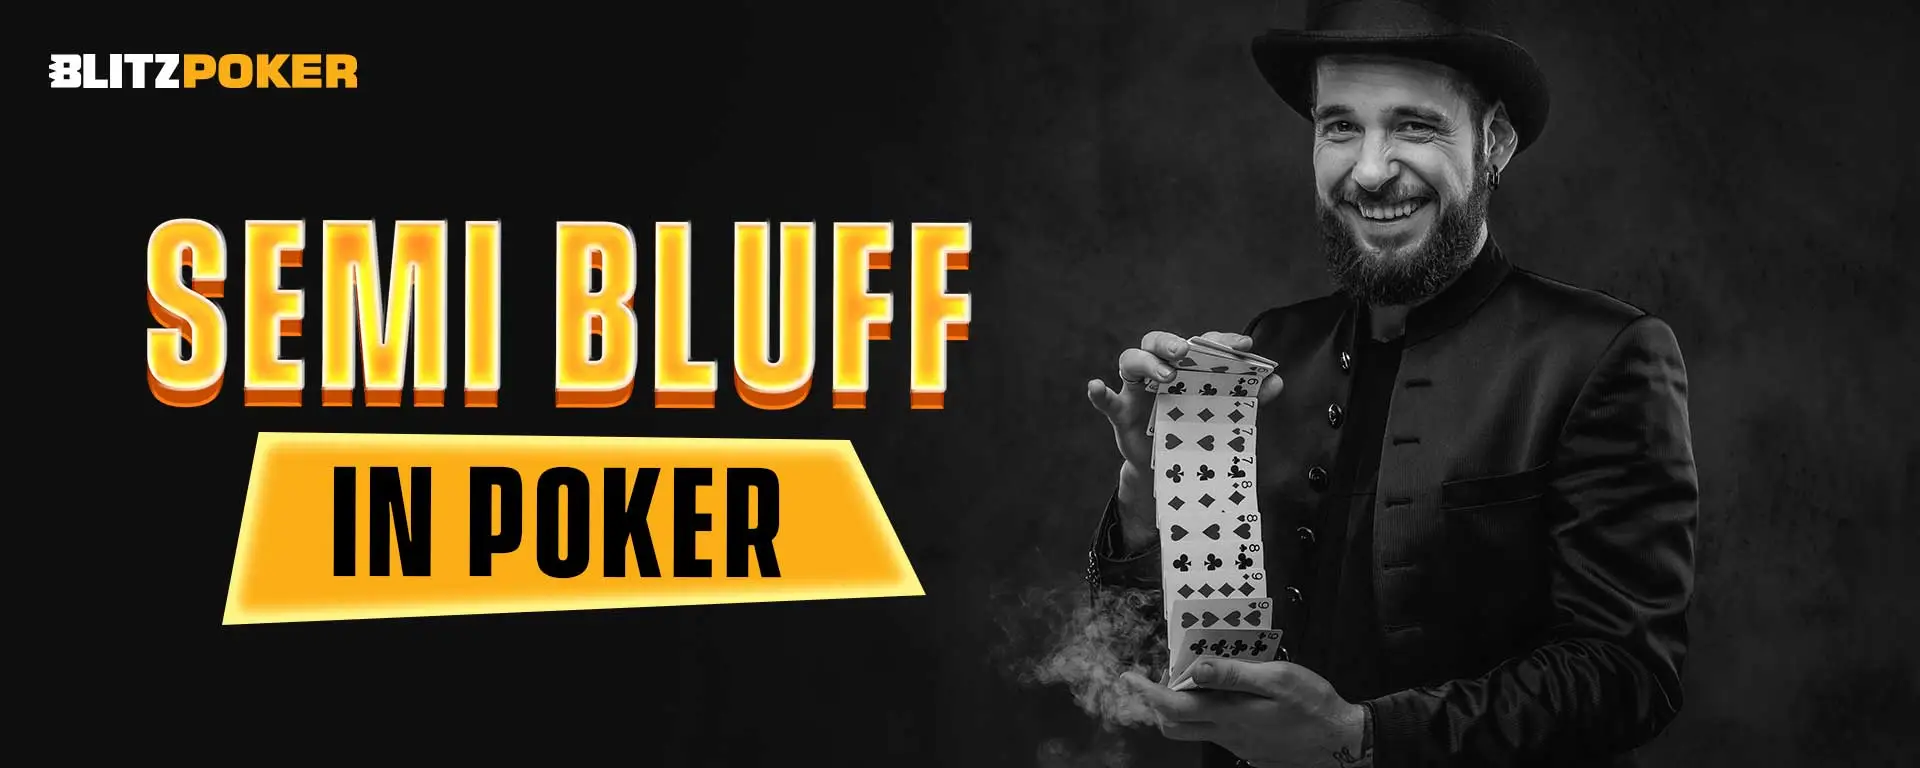 Semi Bluff in Poker: Meaning, When To Use & More